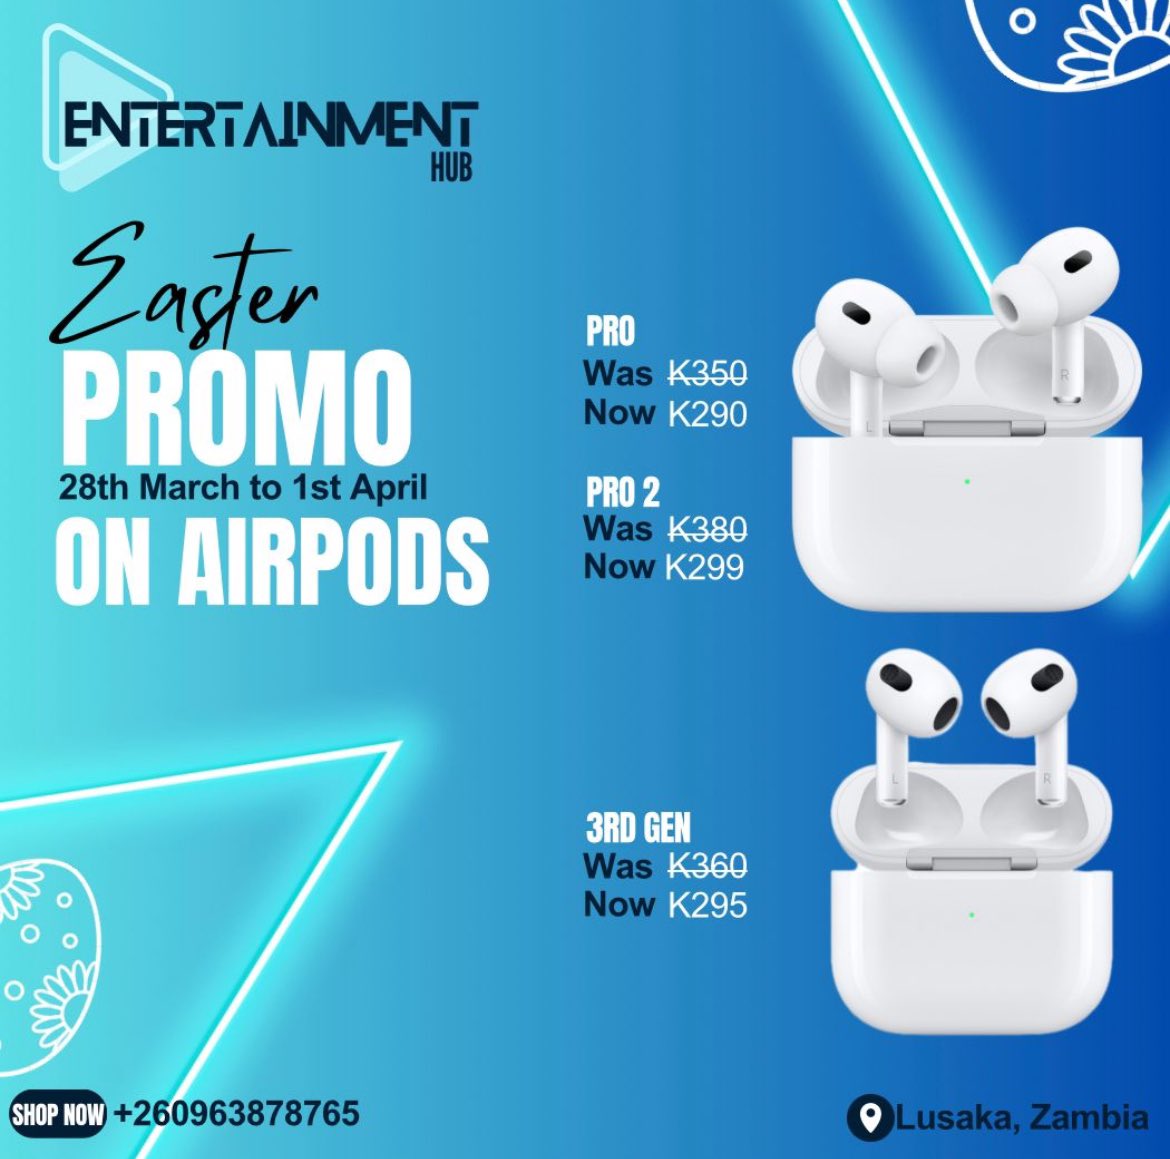 Please retweet this Promotion , we deliver anywhere in zambia (at a fee given by courier) 🚚  

AirPods Pro 2: K299 only !!

#airpodspro #Airpods #Entertainmenthub #shopping #lusaka #Zambia